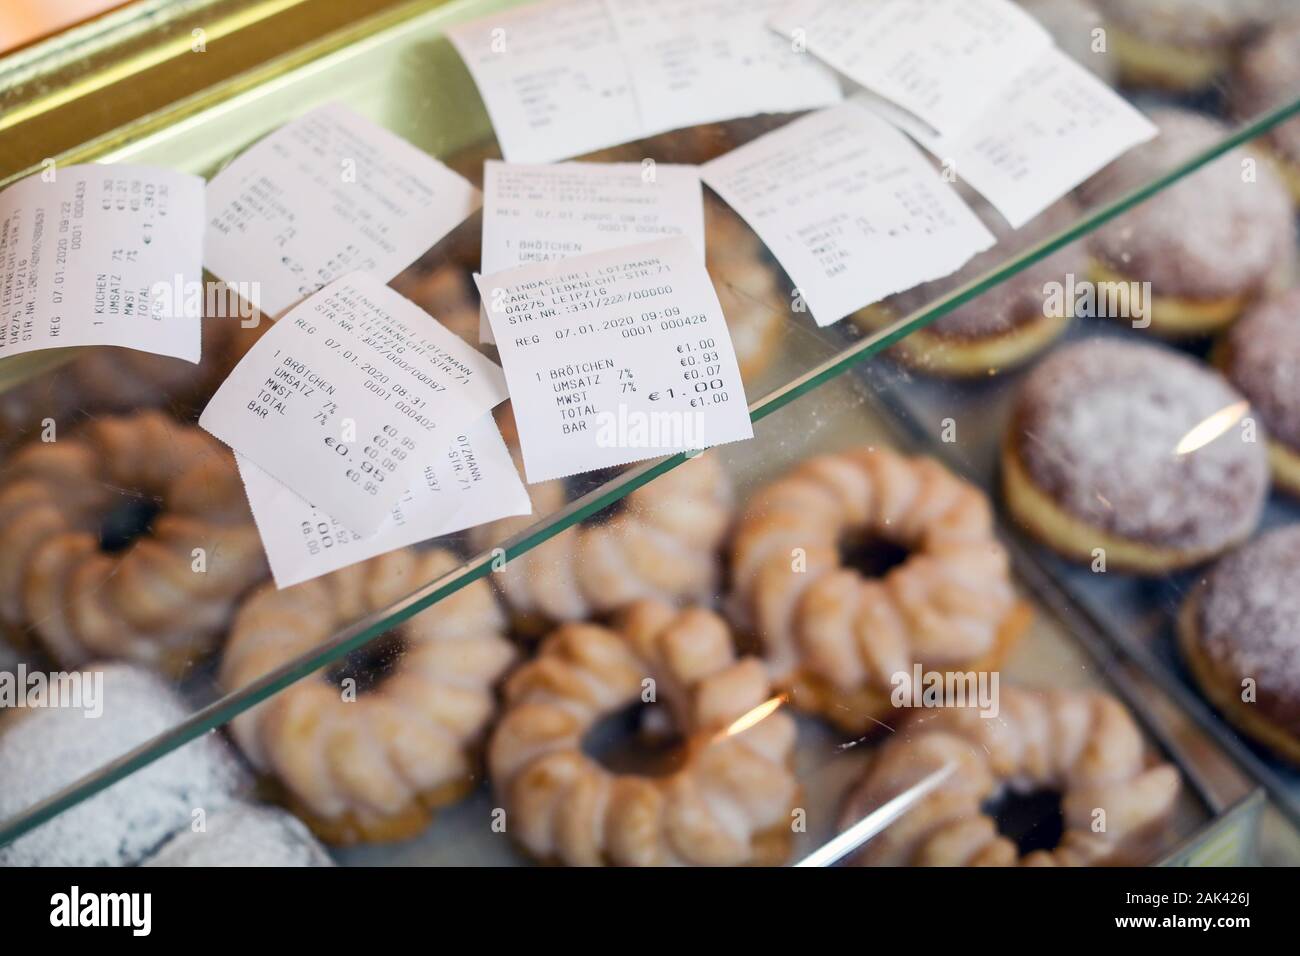 07 January 2020, Saxony, Leipzig: Remaining receipts lie on the counter of a pastry shop. Just a few days after the controversial obligation to pay receipts came into force, the regulation has met with criticism, especially from bakeries. Customers would not take the vouchers with them and the bakeries would have to throw away the freshly printed voucher right away, according to representatives of the bakers' guild. Since 1 January, merchants have had to hand over a receipt to their customers. The law on cash registers passed in 2016 is intended to combat tax fraud, for example through manipul Stock Photo